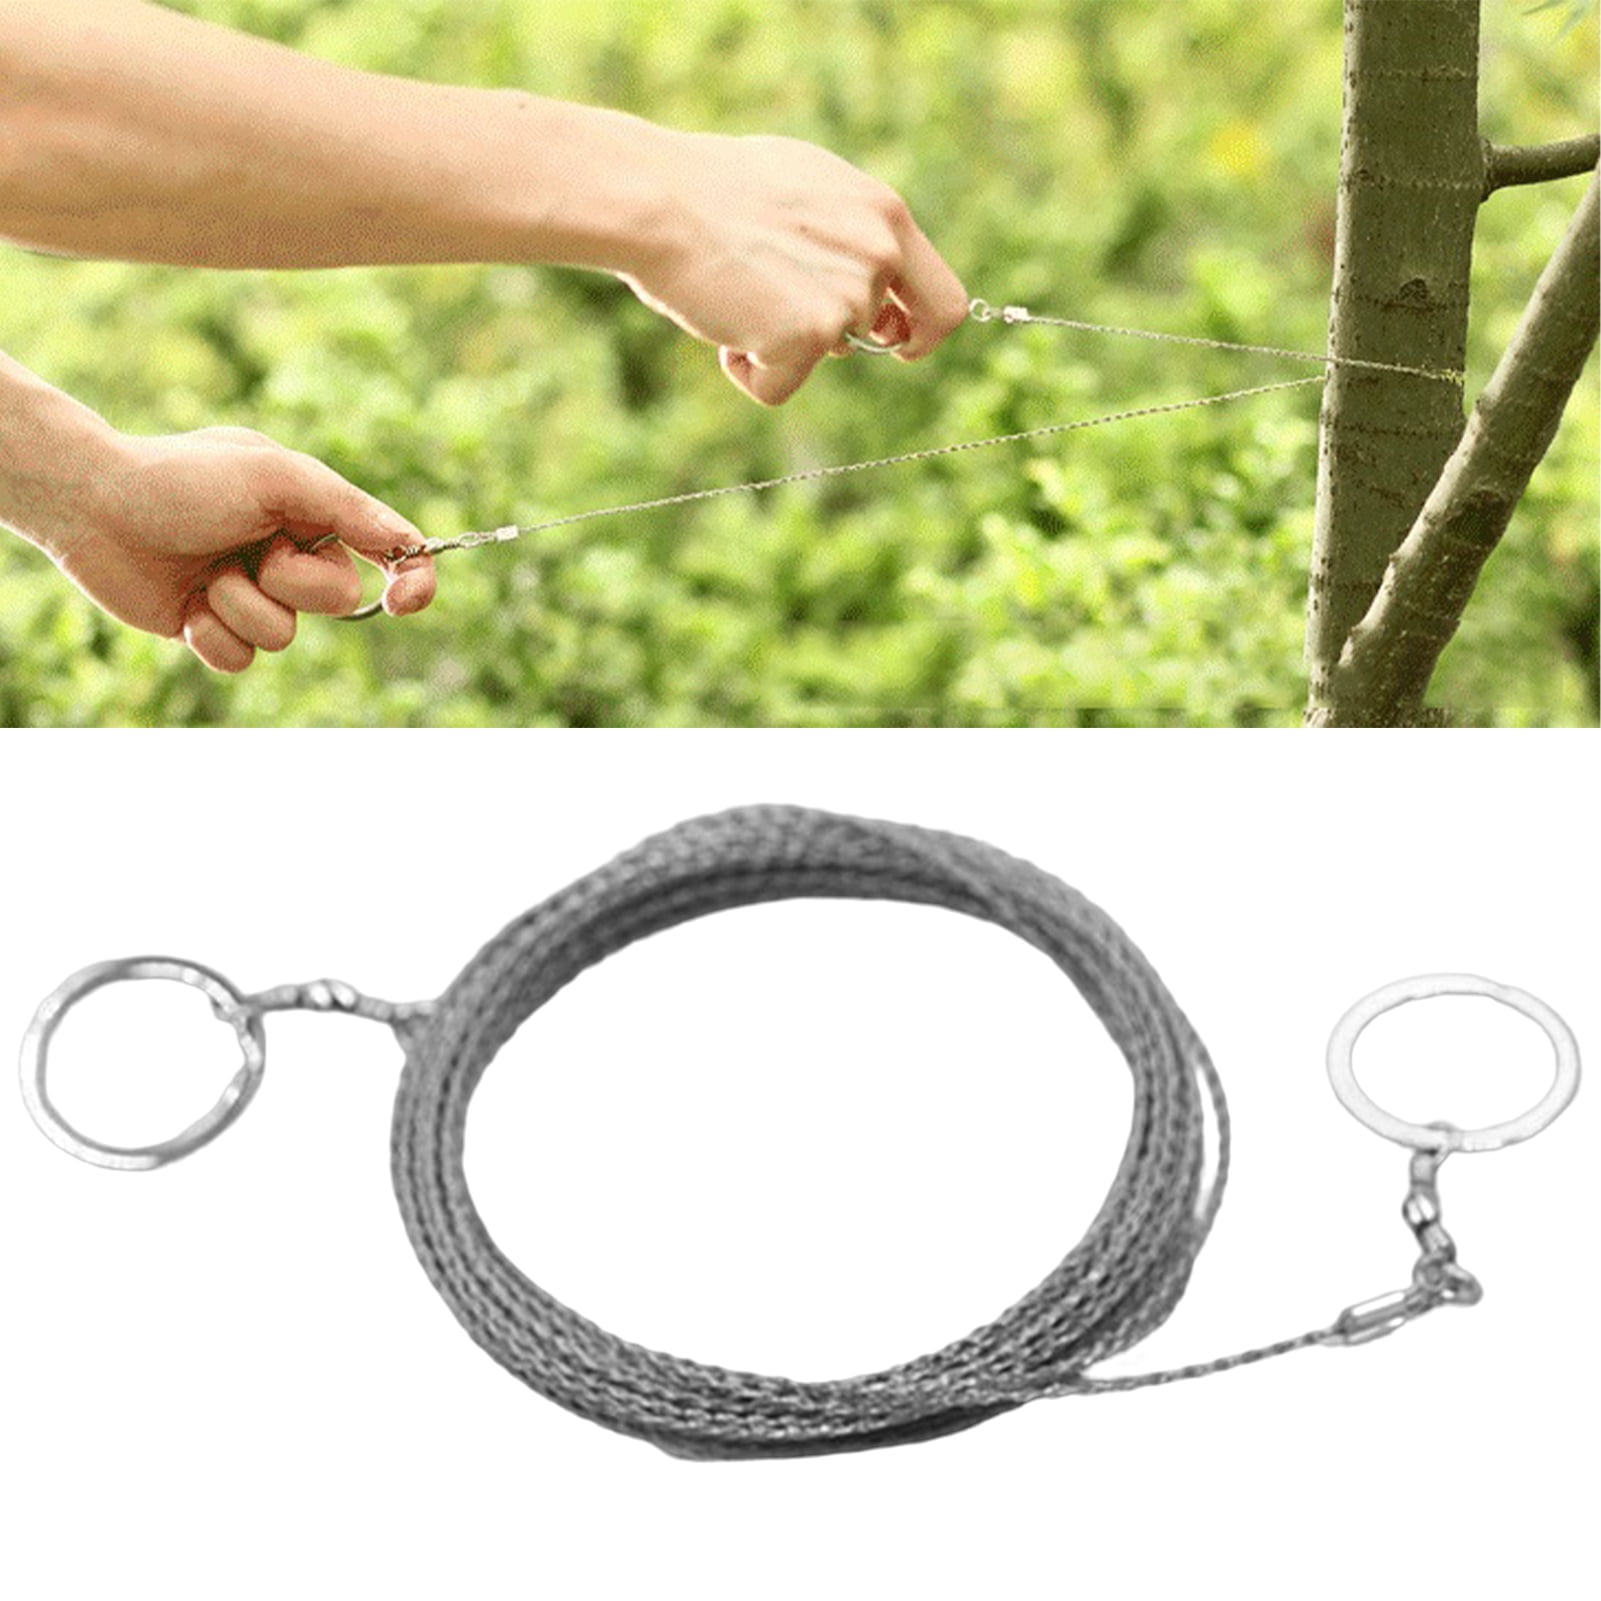 Hcfuz Outdoor Wire Saw Super Long Sharp Anti-rust Corrosion-Resistant Portable Cutting Weed Survival Tool High Strength Stainless Steel Emergency